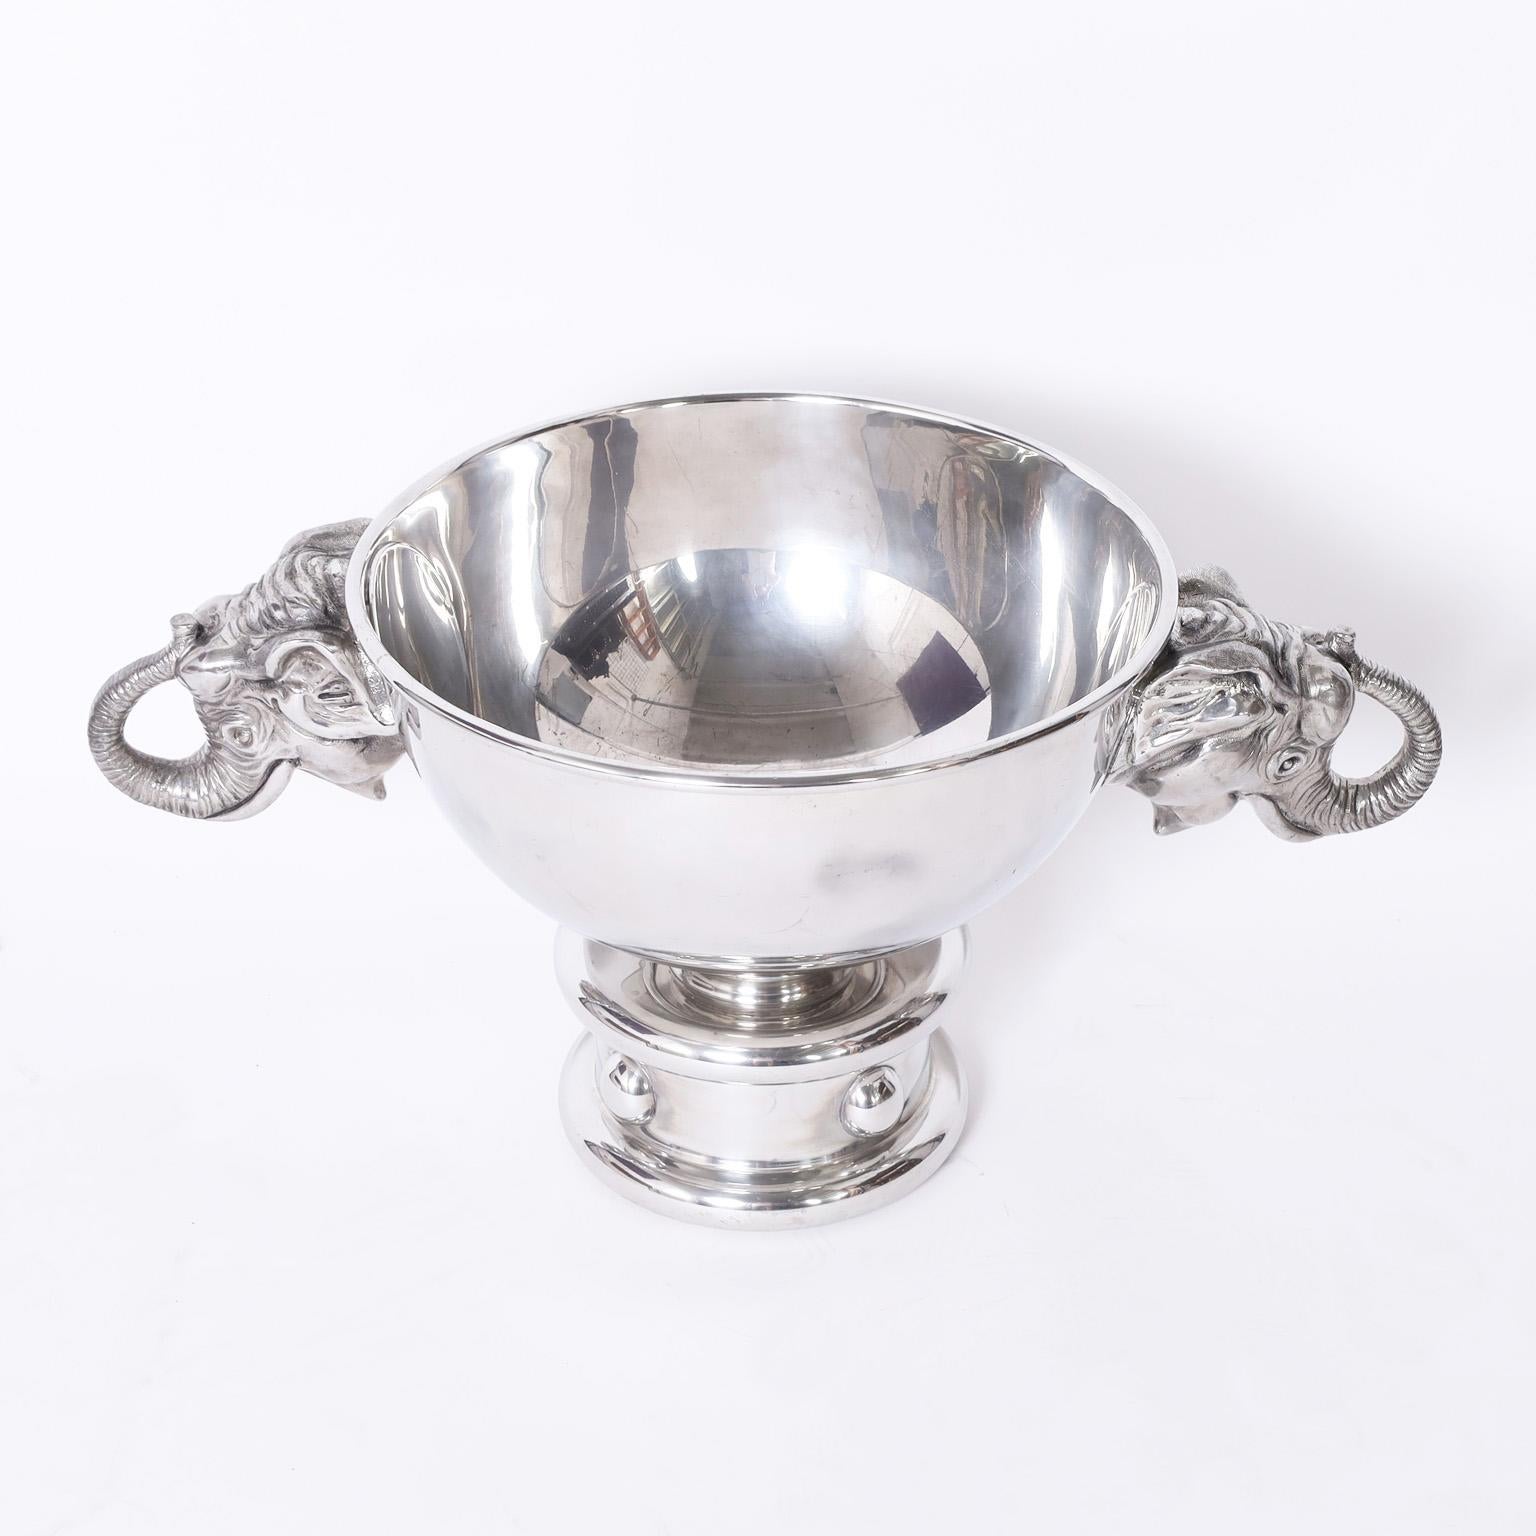 Rare and remarkable extremely large Art Deco Italian champagne, wine or ice bucket crafted in silver plate over pewter with elephant head handles over a classic 1930s style base. Designed by Piero Figura for Atena.